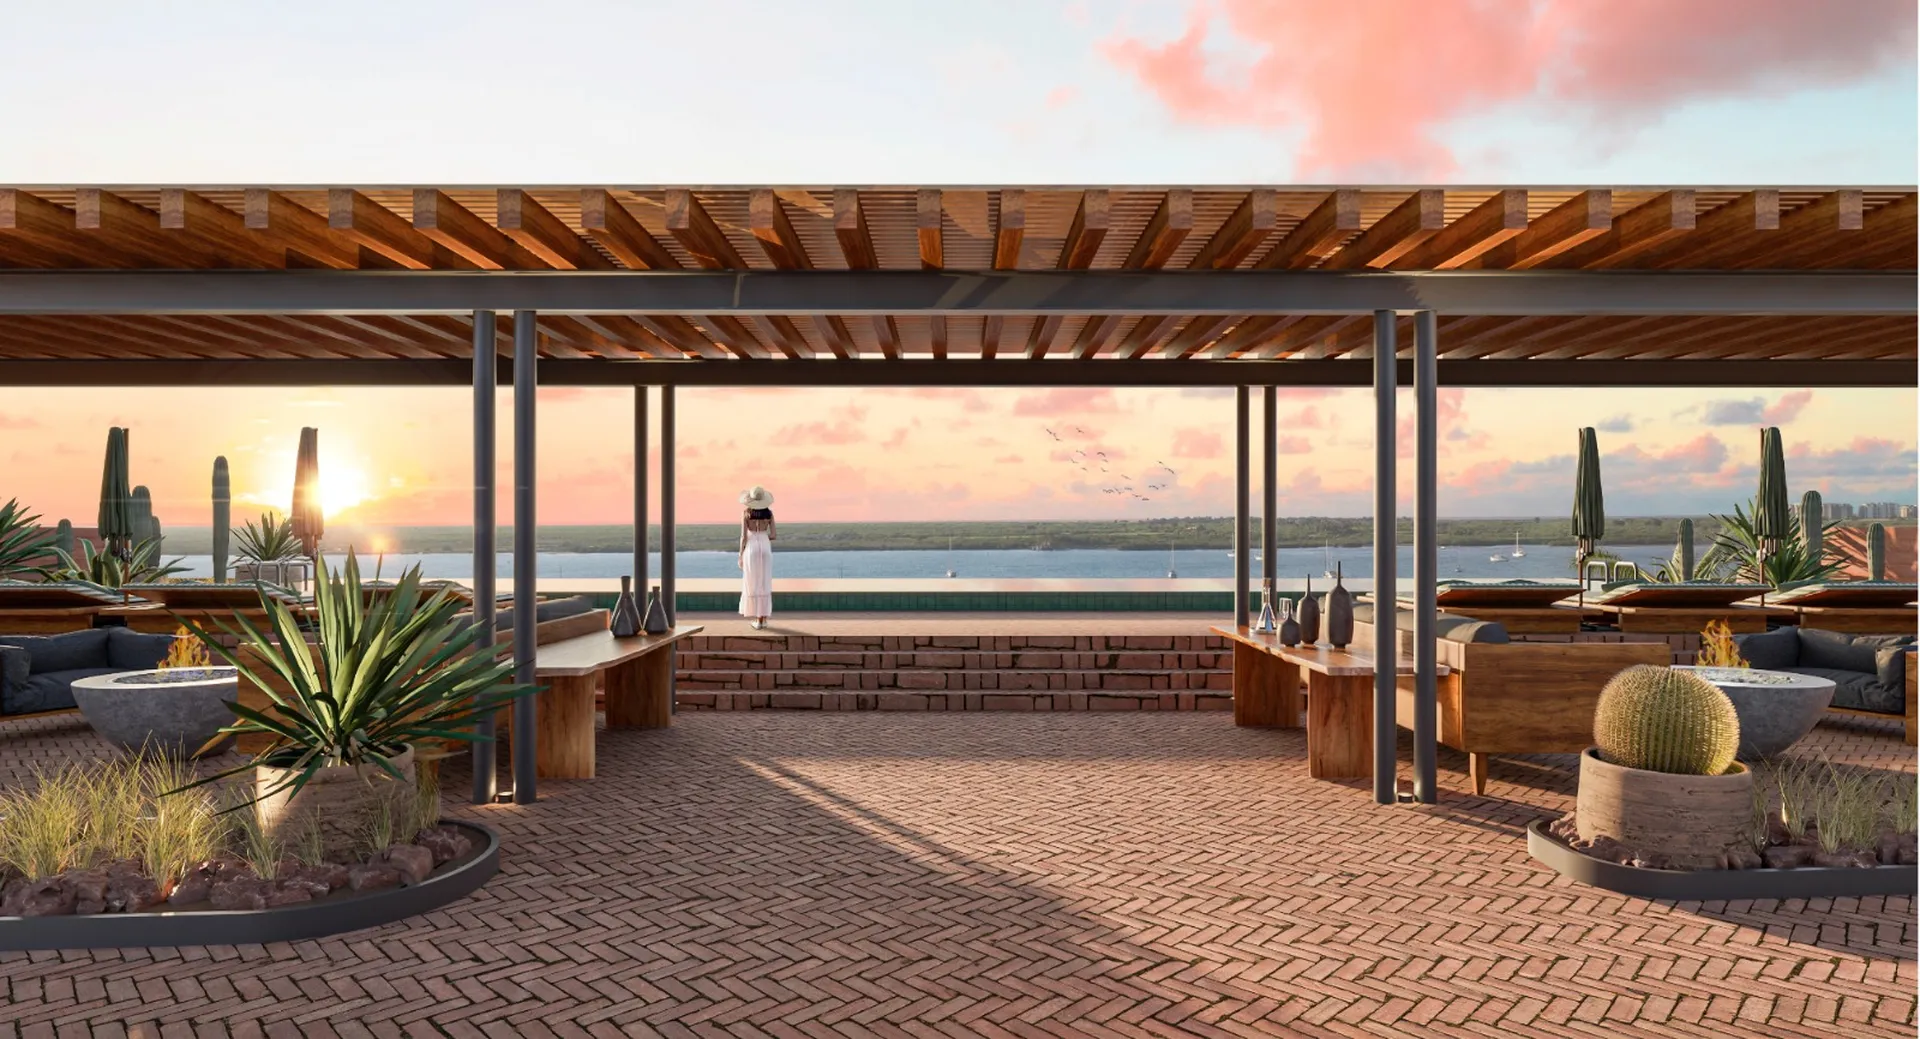 Live the sea of Cortez. With an unbeatable location and design, LAIVA achieves a modern lifestyle without leaving behind the tradition that symbolizes ''La Baja'' in Mexico.